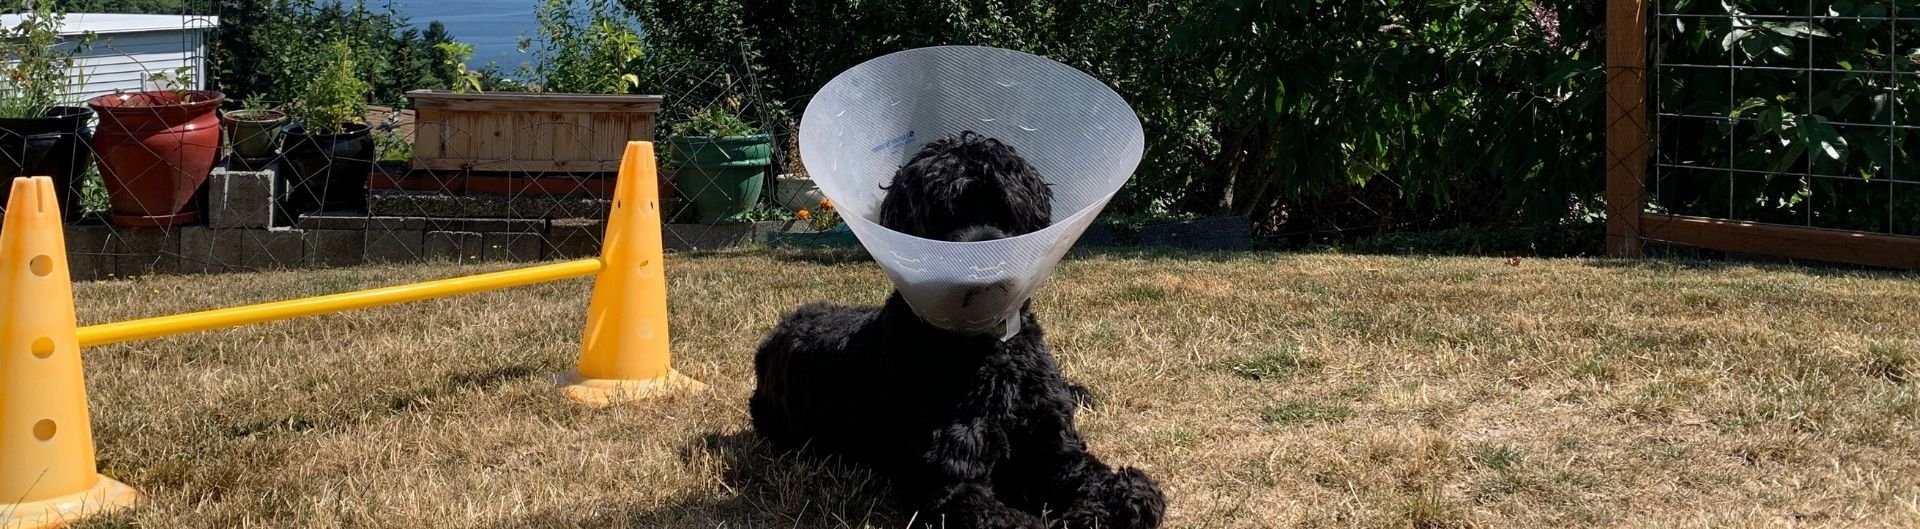 black dog sitting outside wearing a plastic cone collar